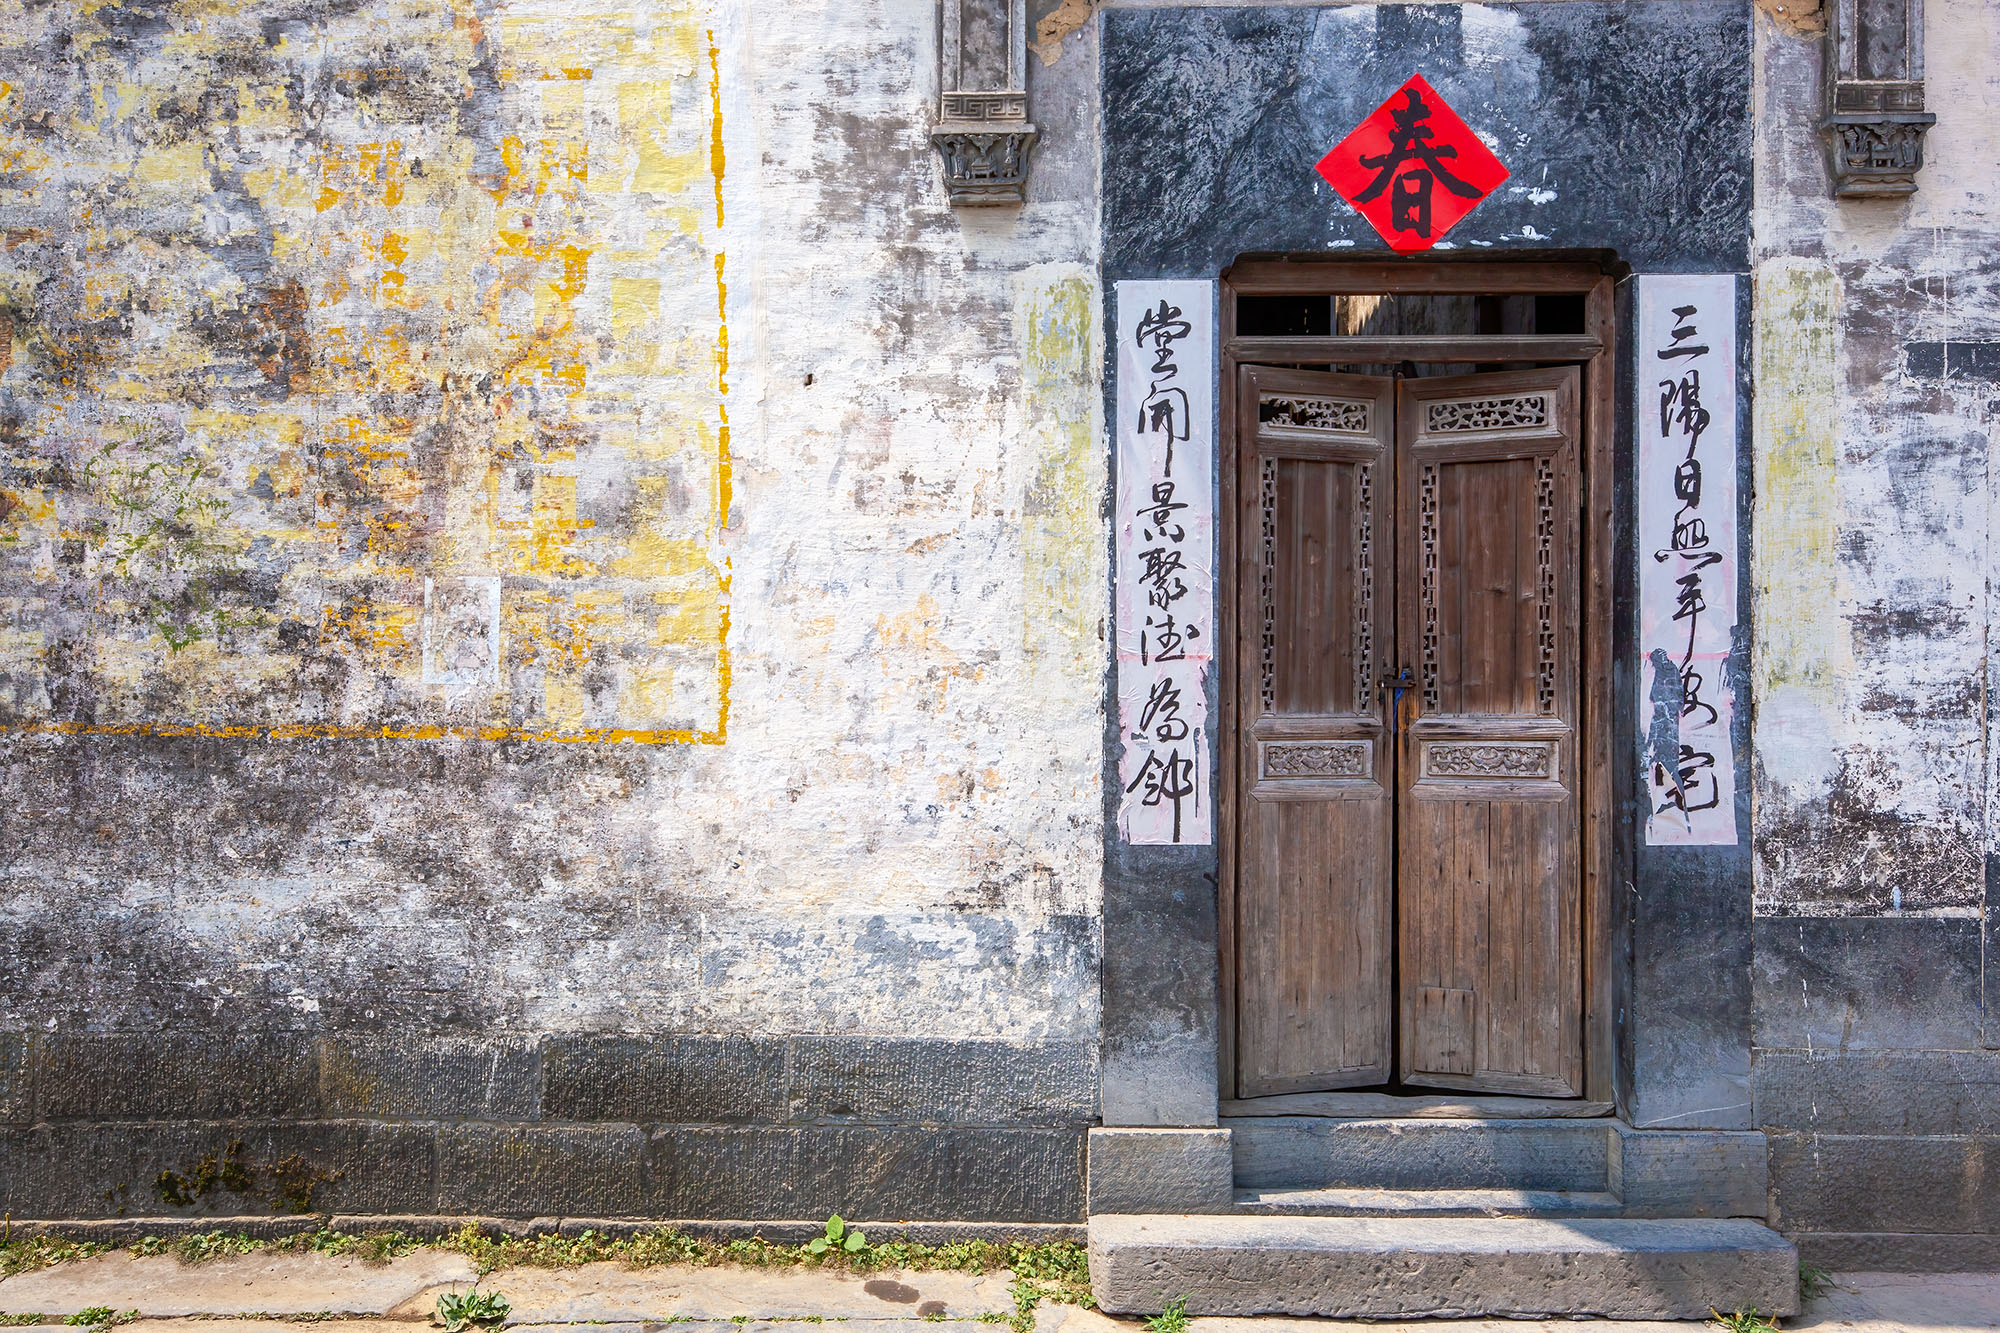 In this image from Xidi, Anhui, China, a doorway beckons with its inscriptions and a red icon overhead. The textures speak of...